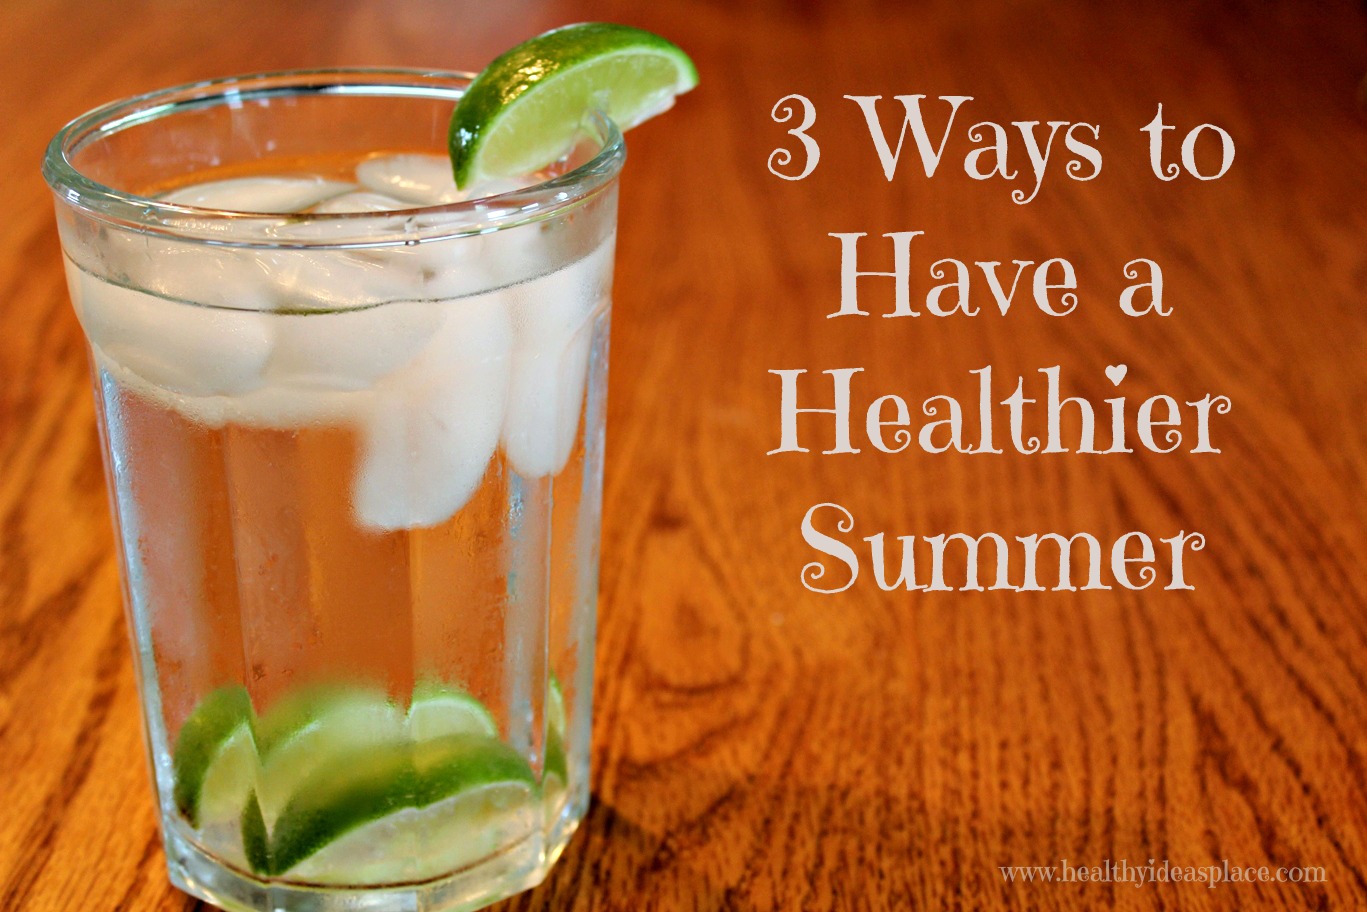 The words "3 Ways to Have a Healthier Summer" next to a glass of ice water with lime slices